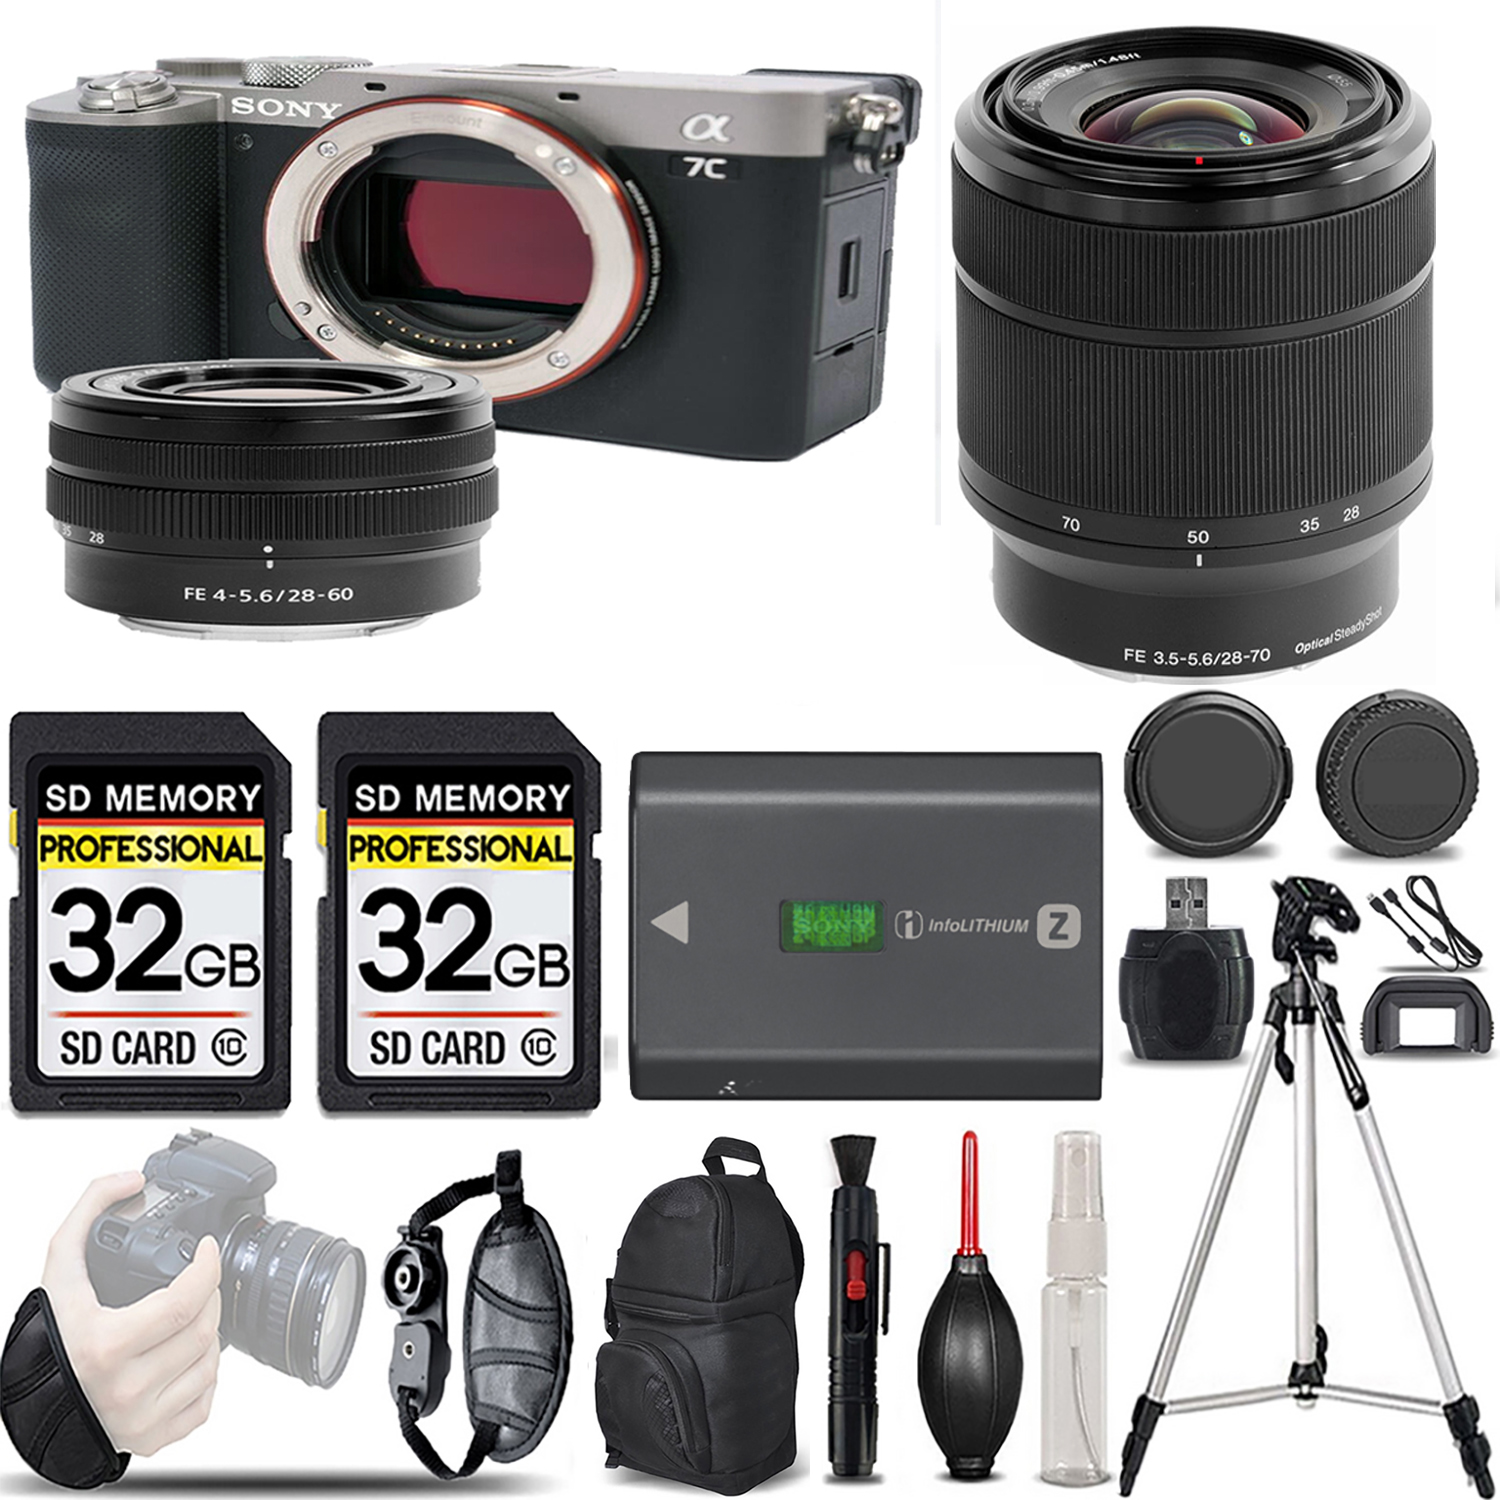 Alpha a7C Camera (Silver) + 28-60mm Lens + 28-70mm f/3.5-5.6 OSS Lens - LOADED KIT *FREE SHIPPING*